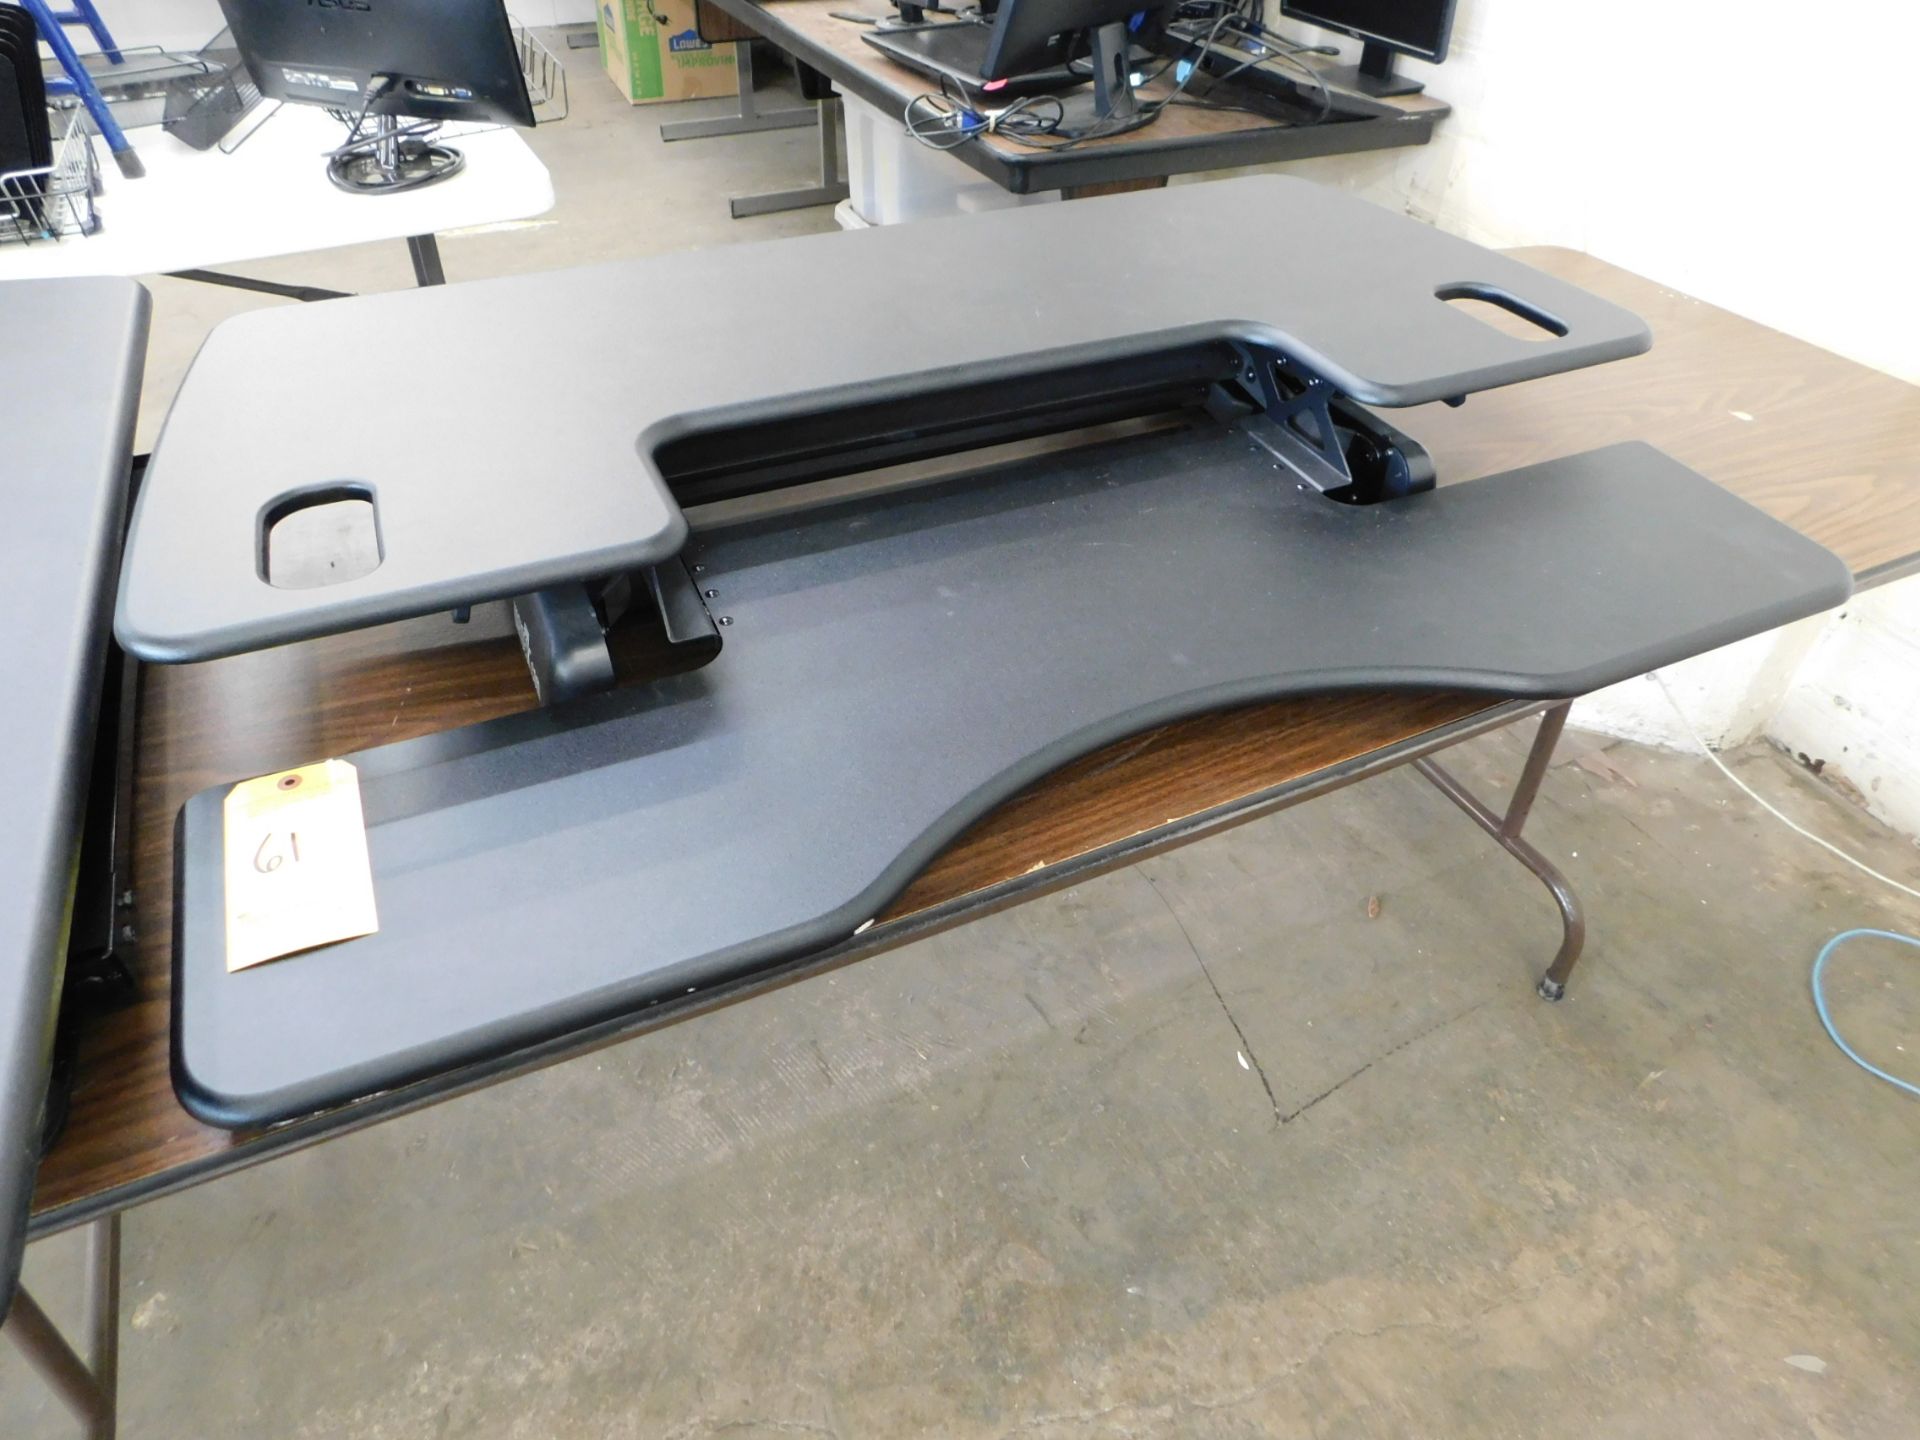 Varidesk Proplus 48 with 8' Table